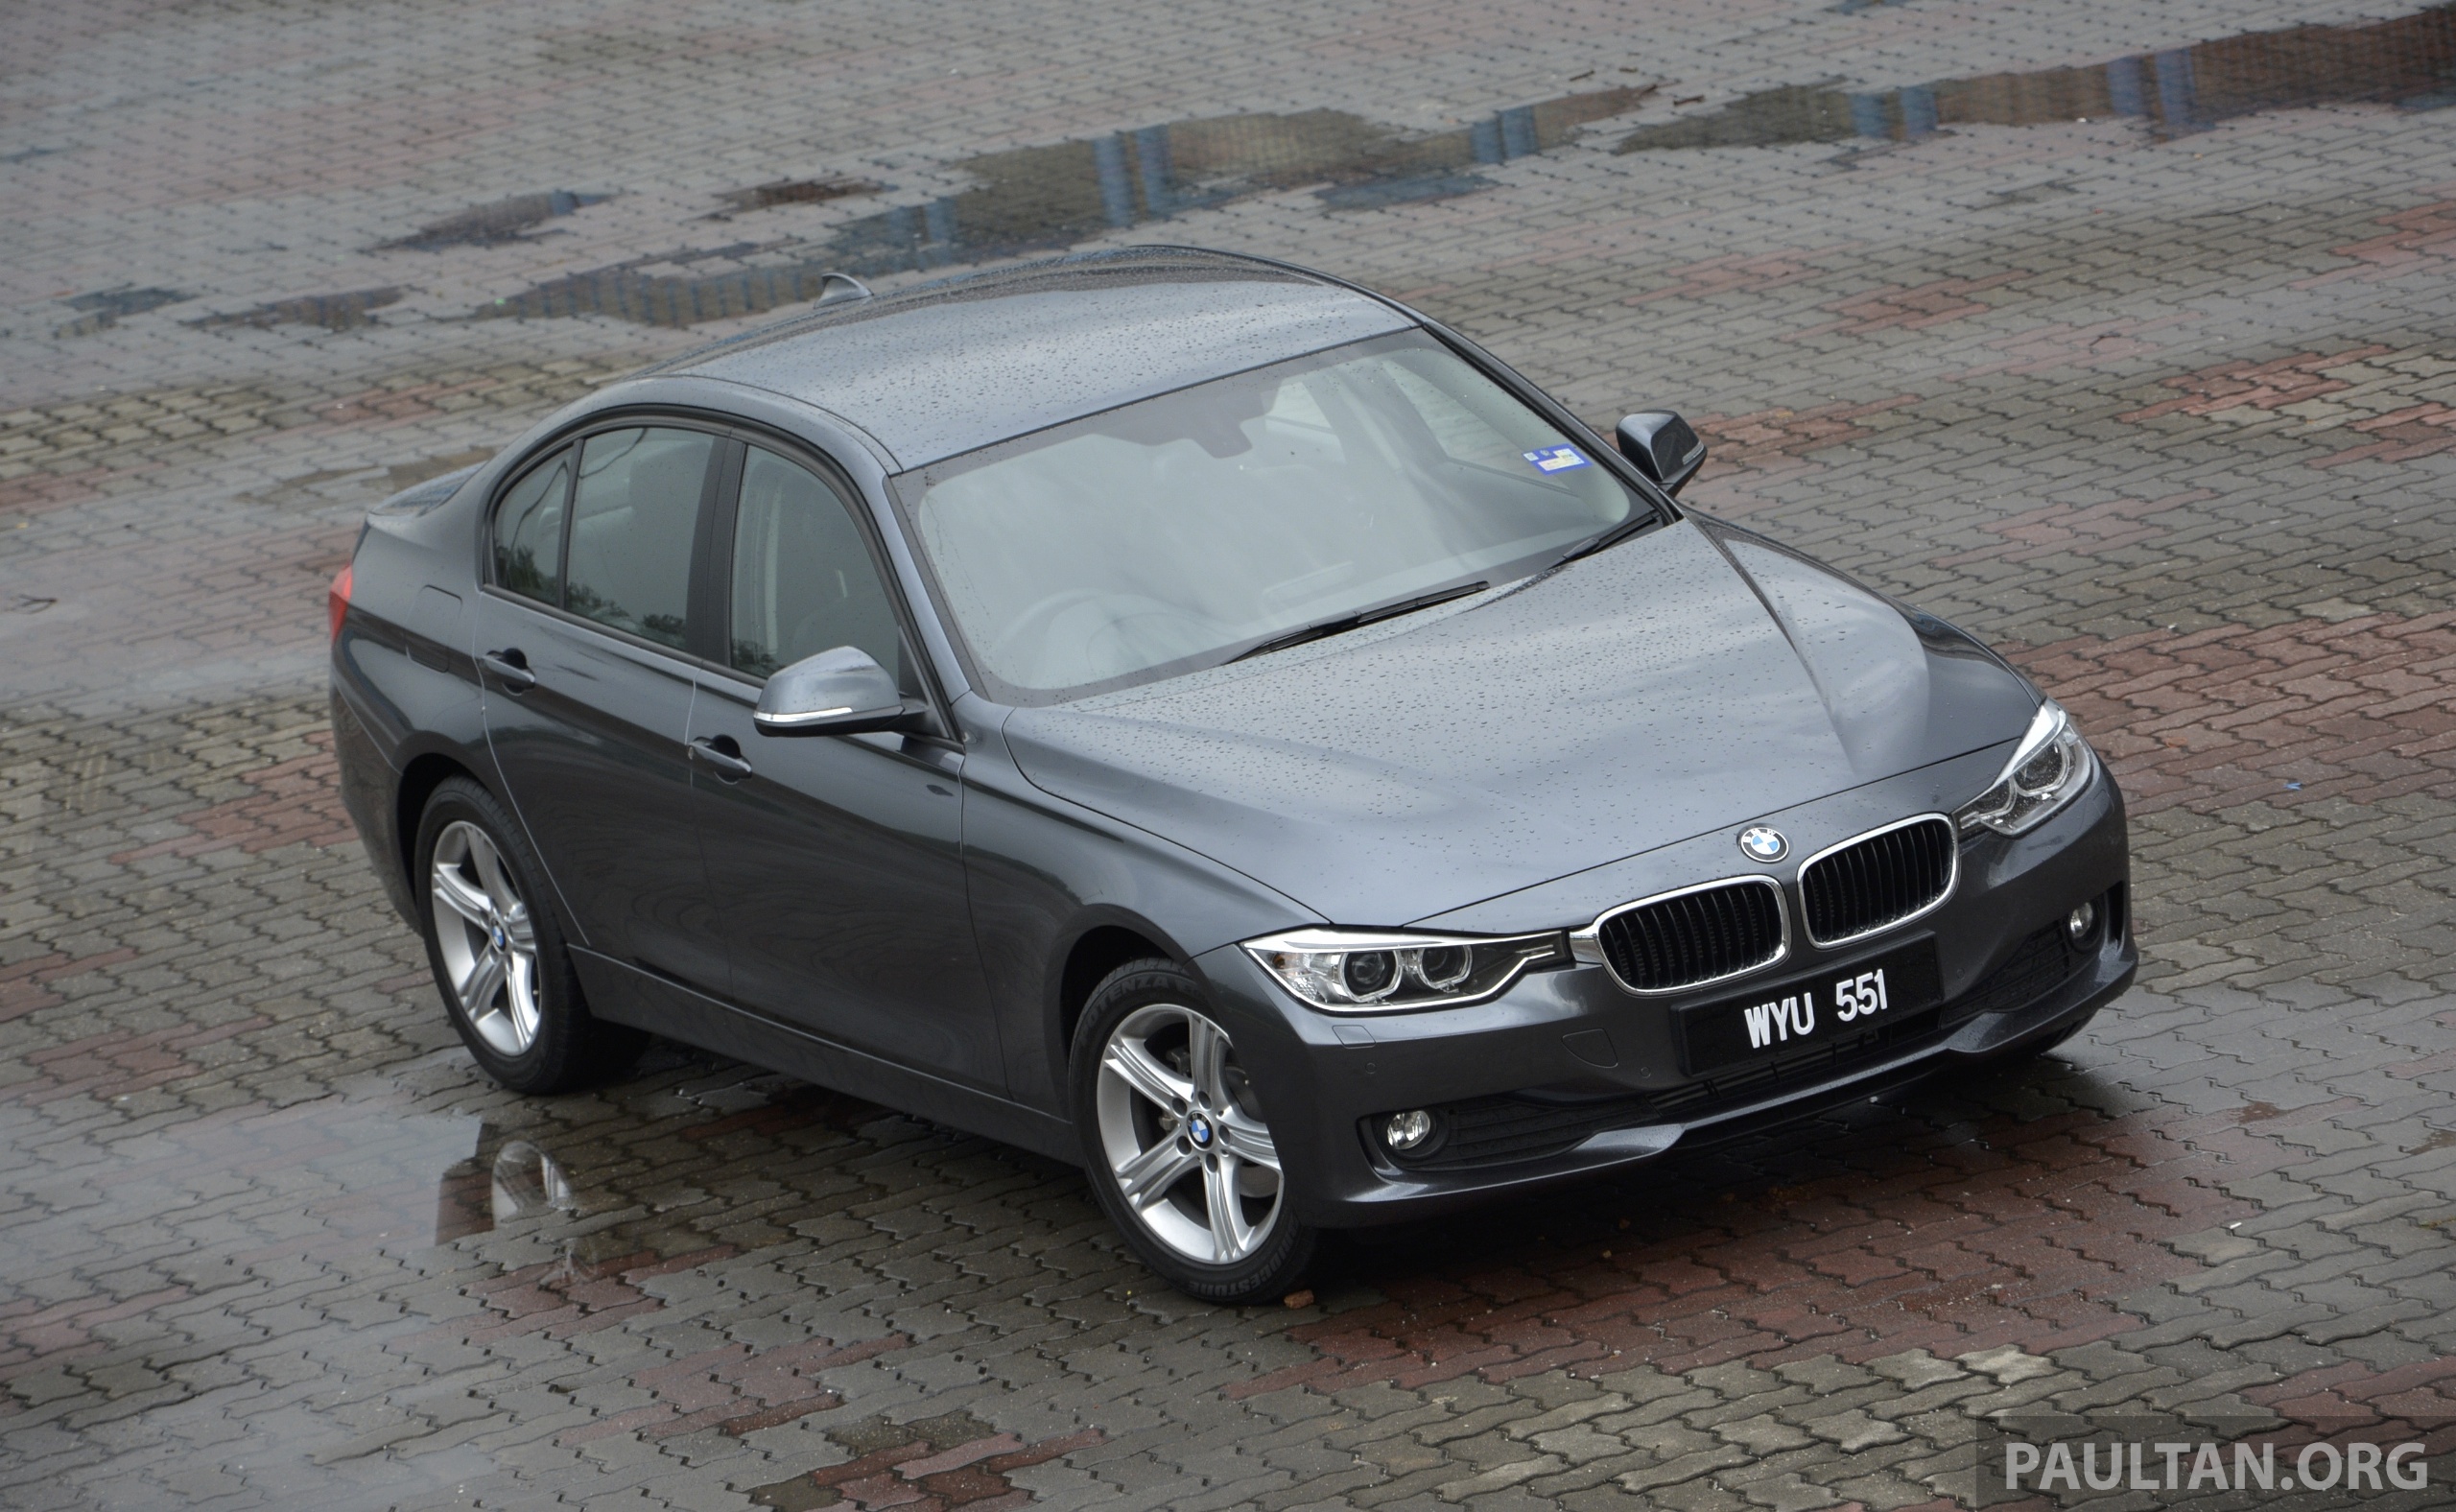 The new bmw 316i 2013 #5